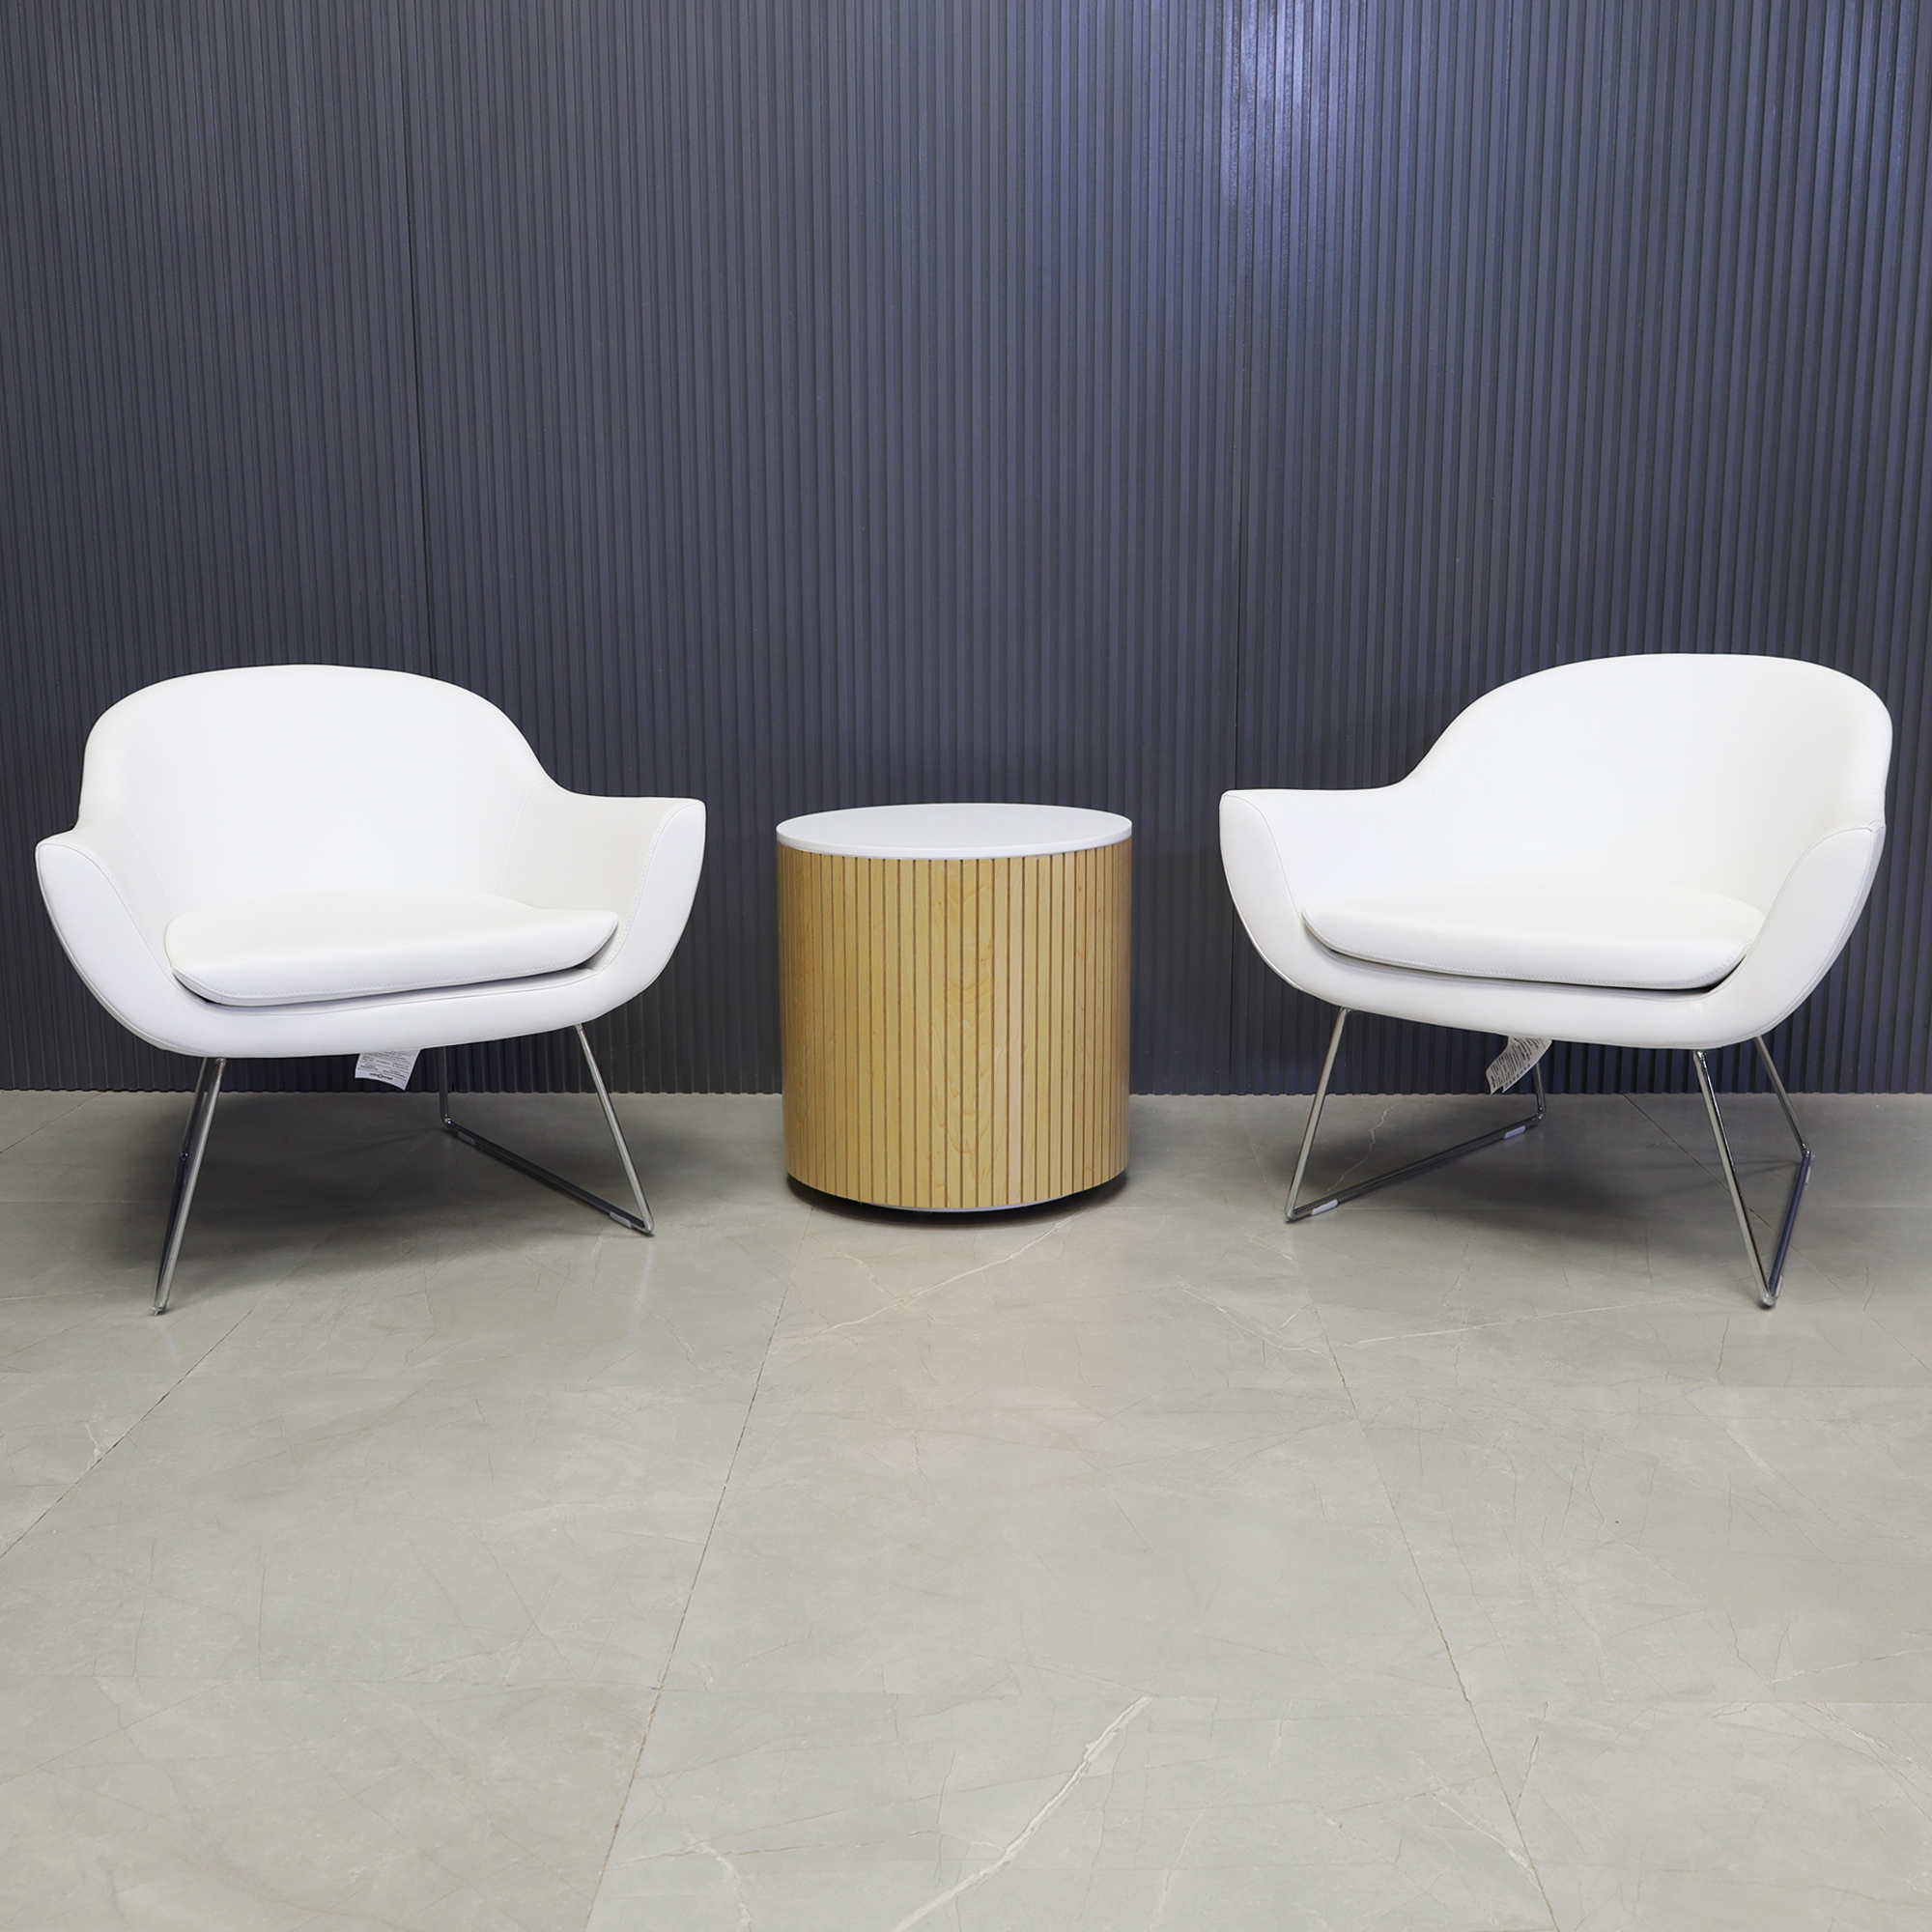 Set of Two White Leatherette Lounge Chairs and One FREE Norfolk Round Lobby Side Table shown here.